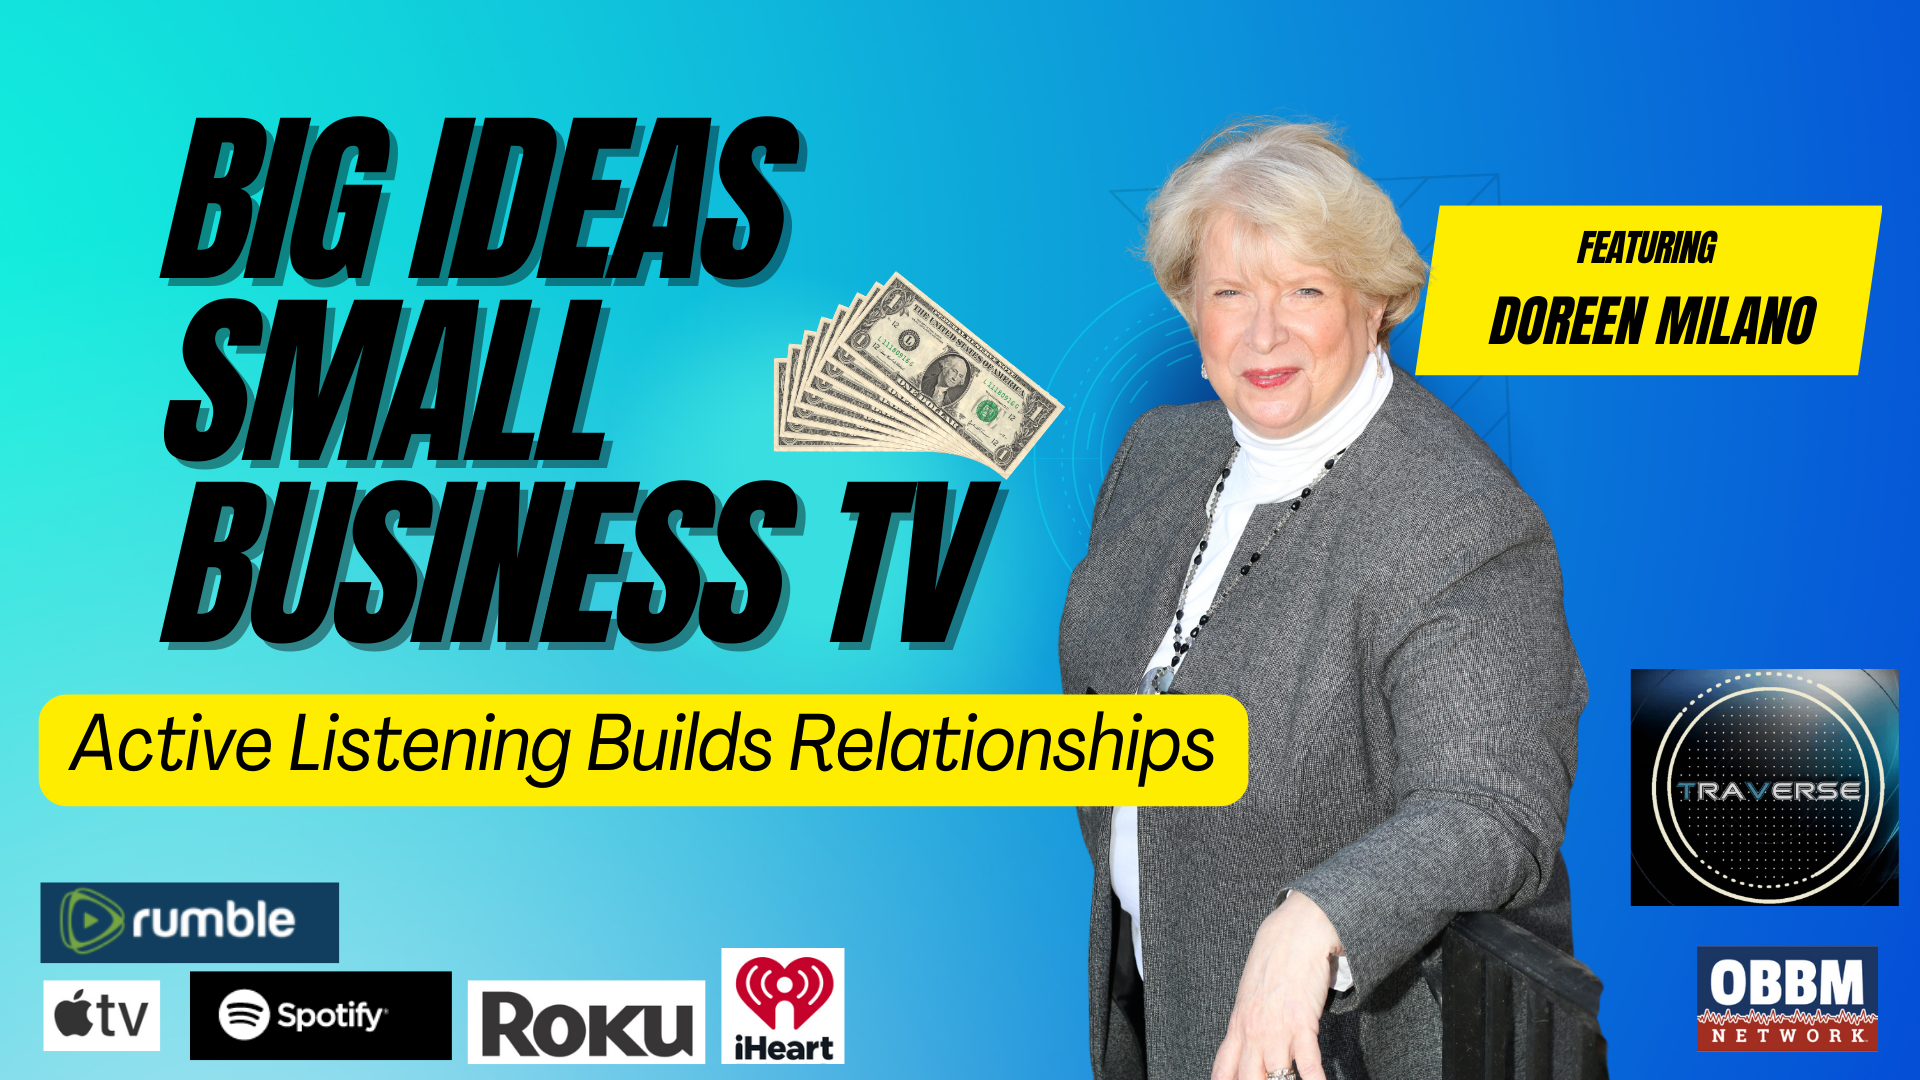 BISB35-Active Listening Builds Relationships - Big Ideas, Small Business TV